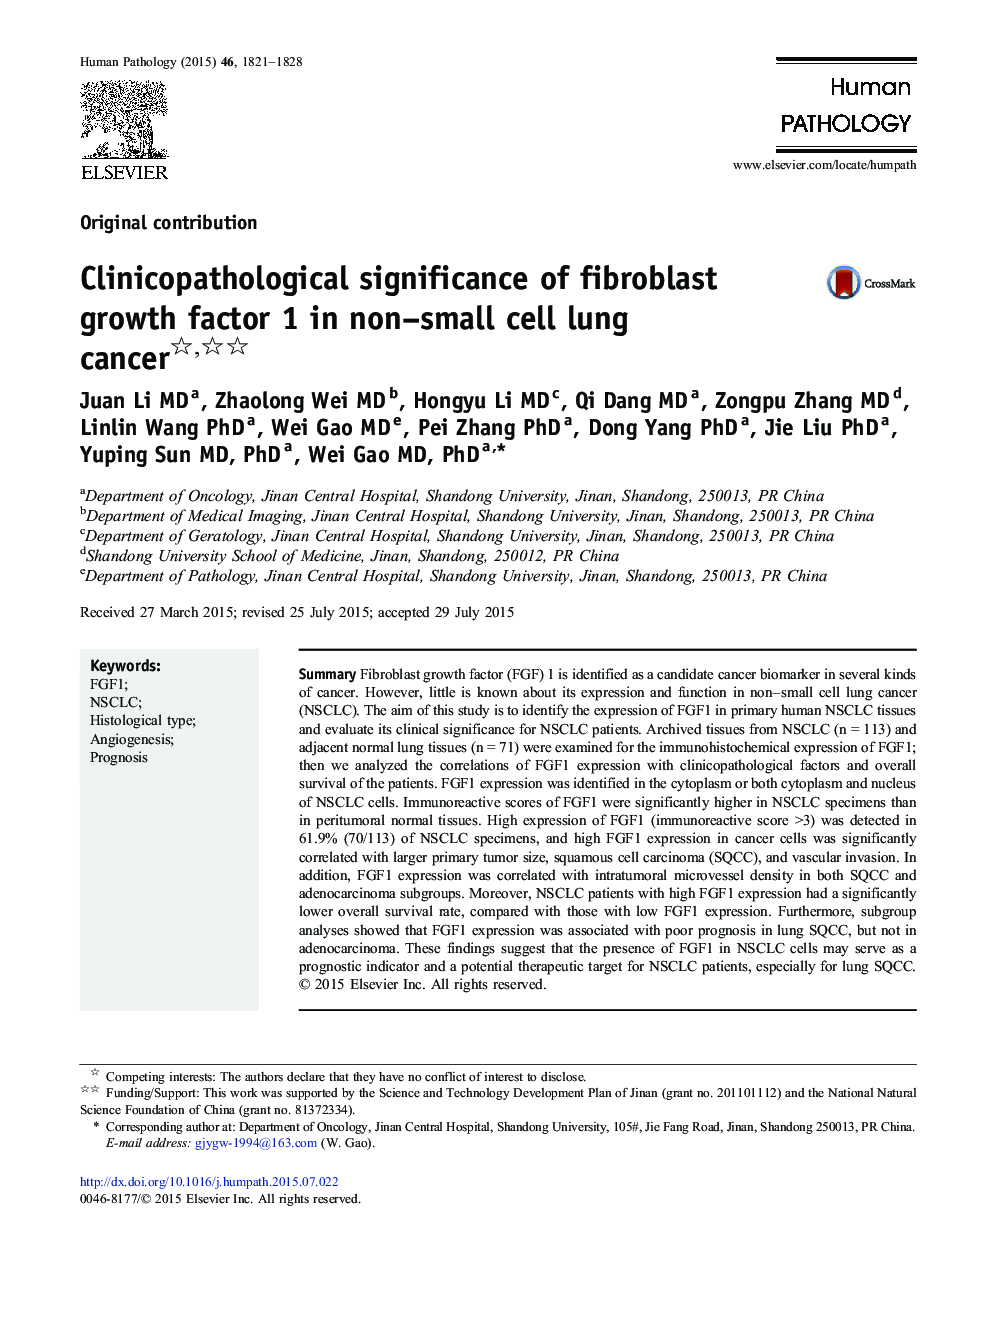 Clinicopathological significance of fibroblast growth factor 1 in non–small cell lung cancer 